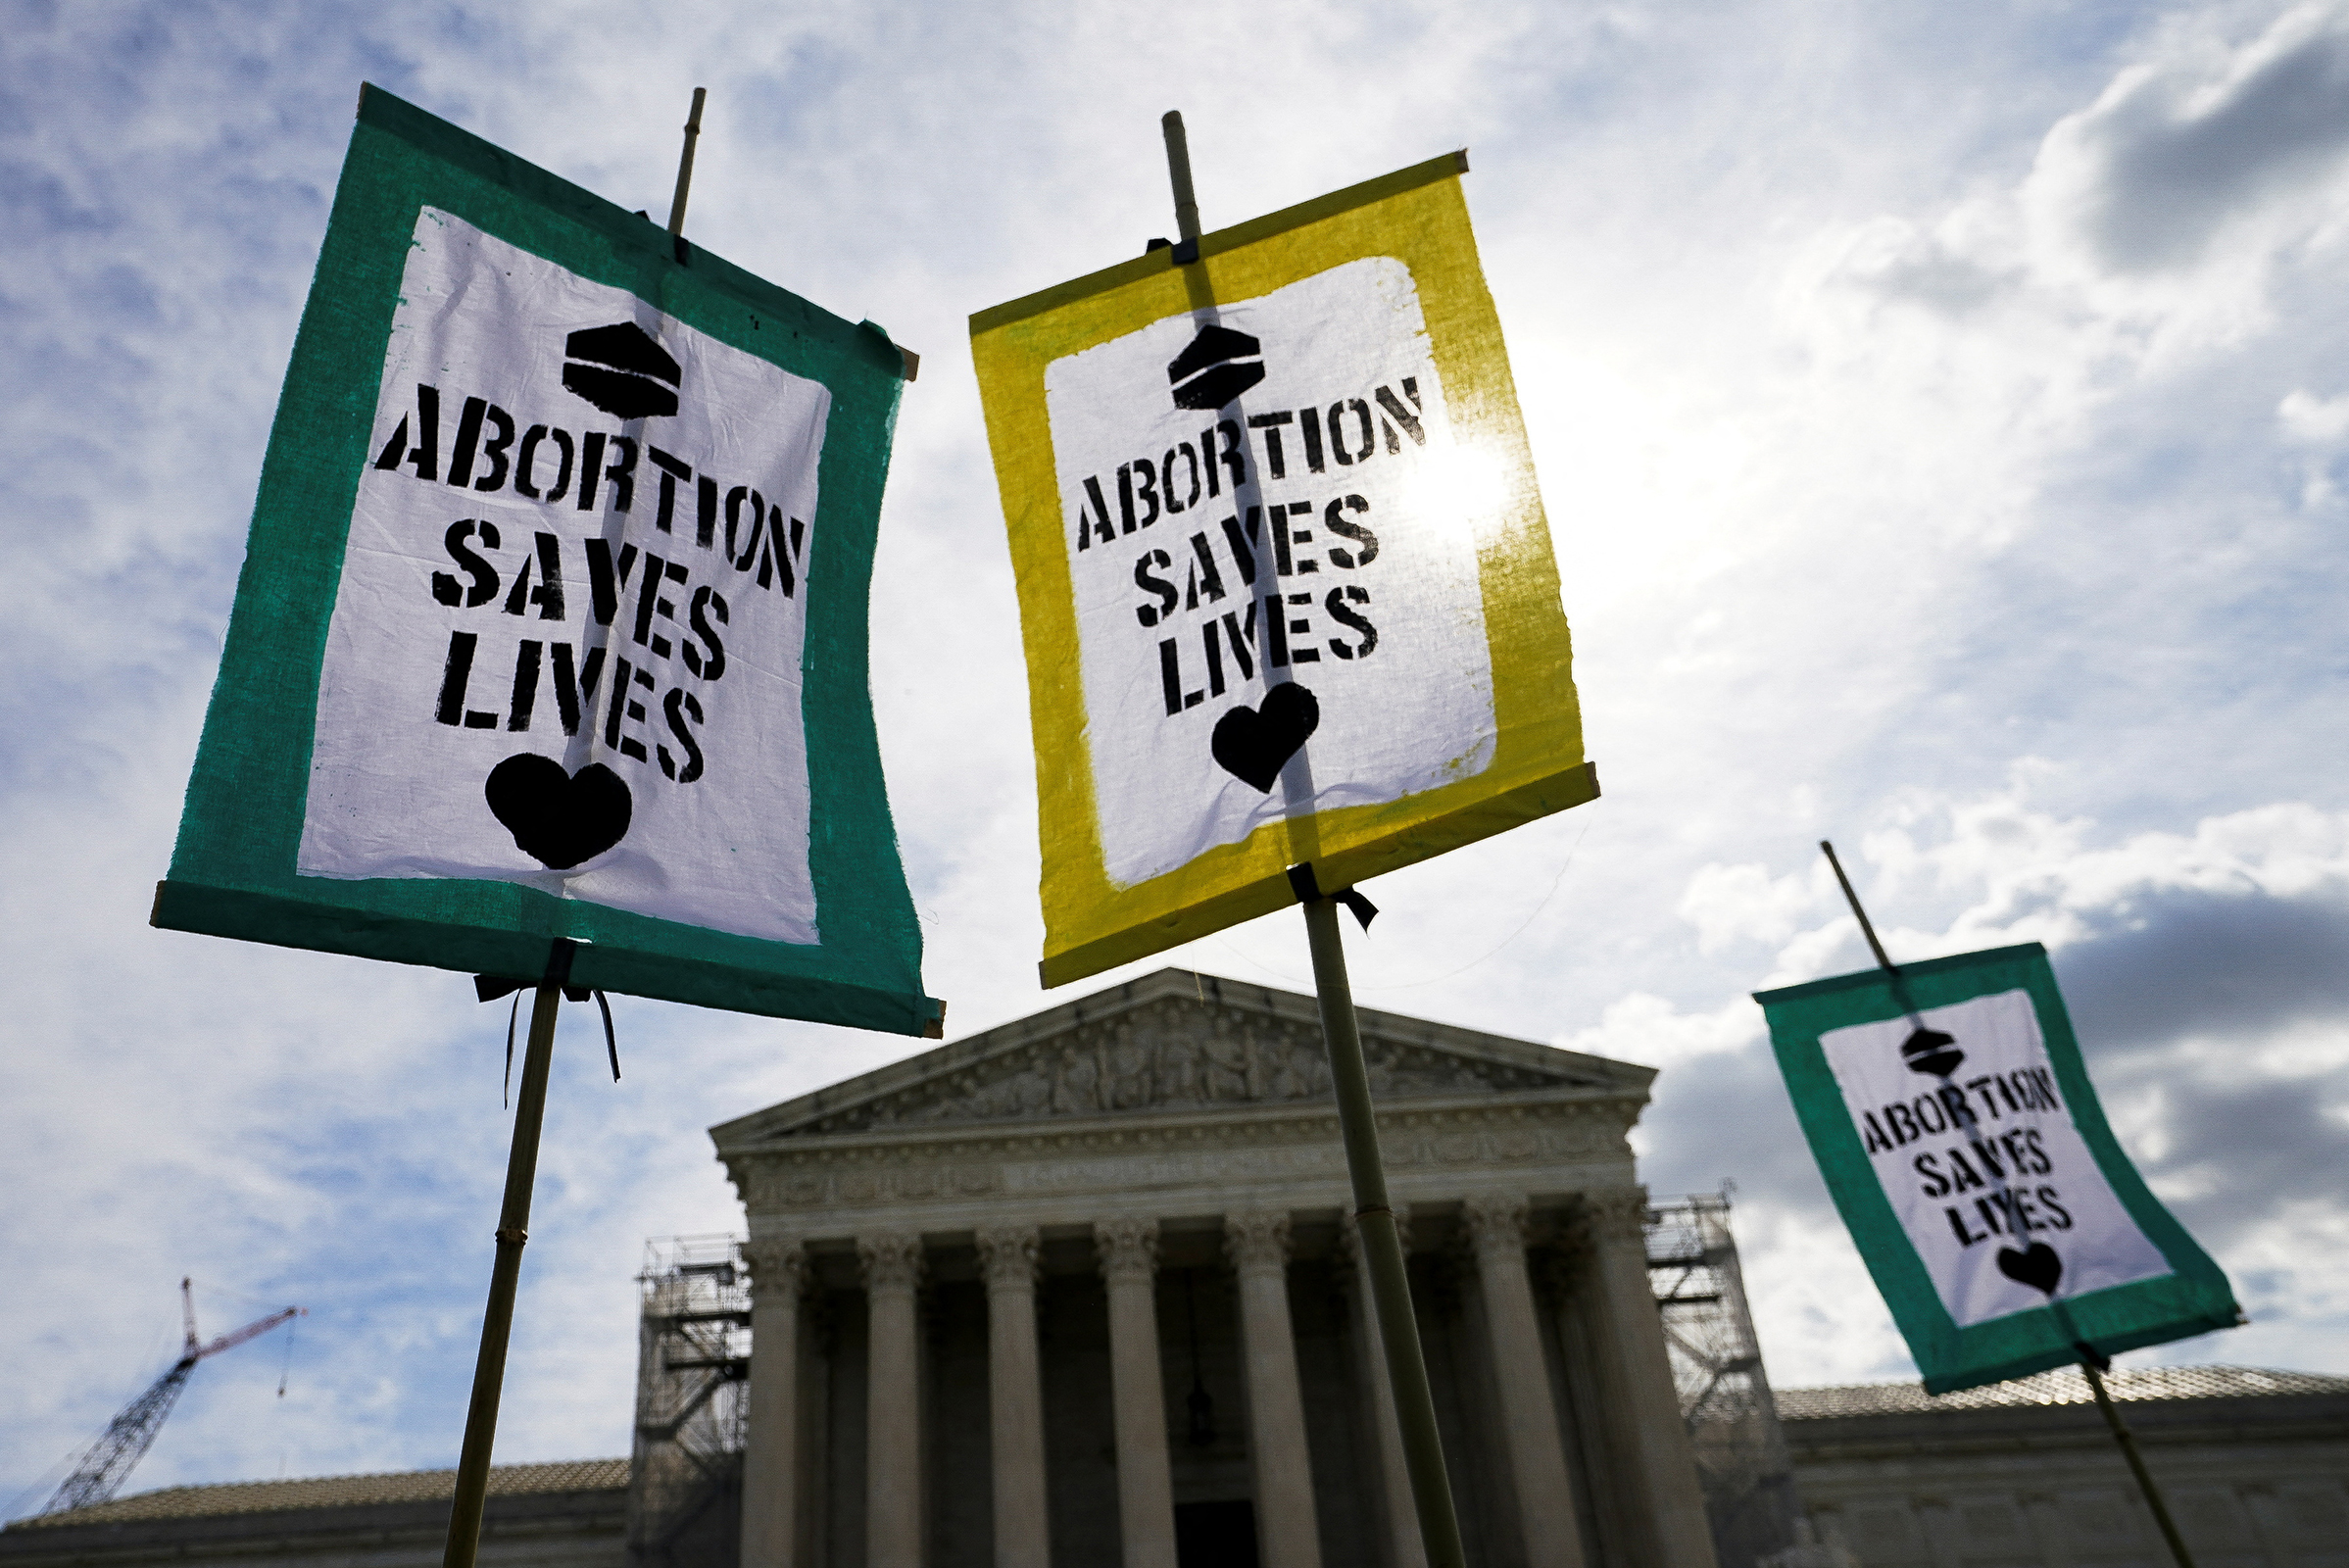 Protesters raise placards in support of abortion rights at the US Supreme Court.